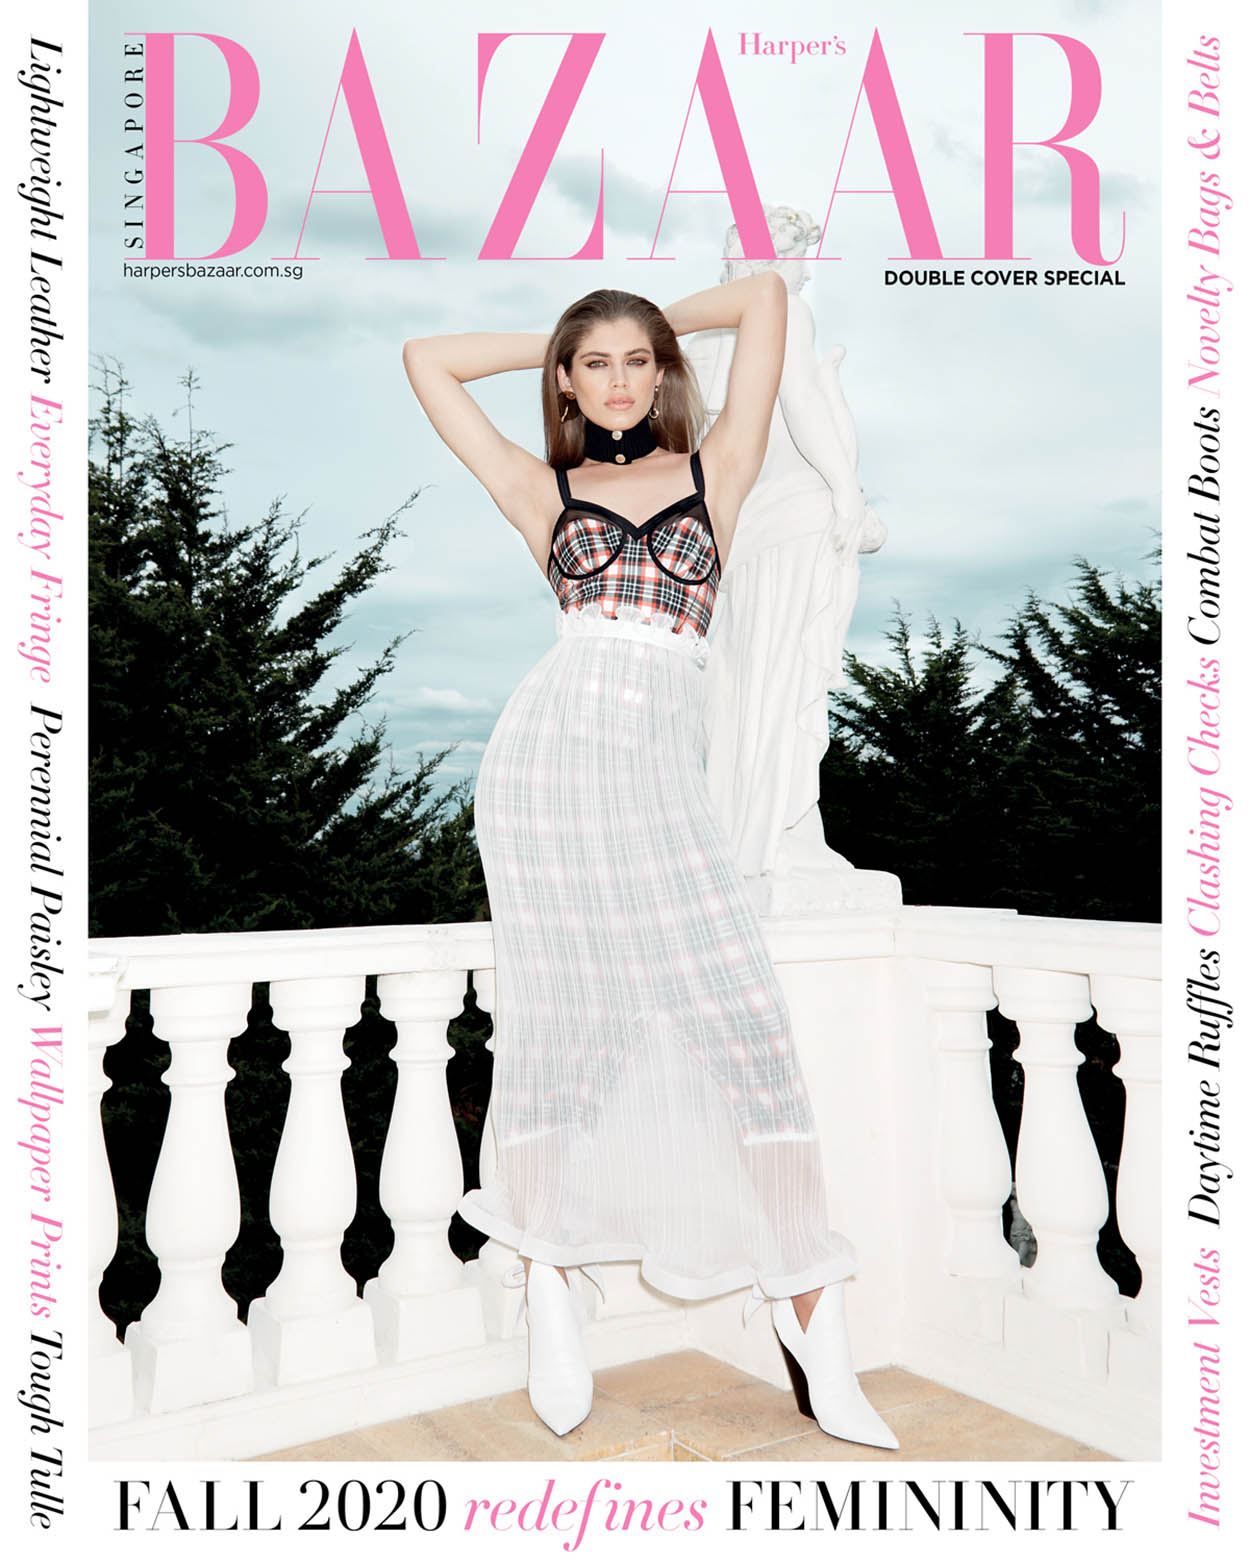 Valentina Sampaio covers Harper’s Bazaar Singapore October 2020 by Claire Rothstein